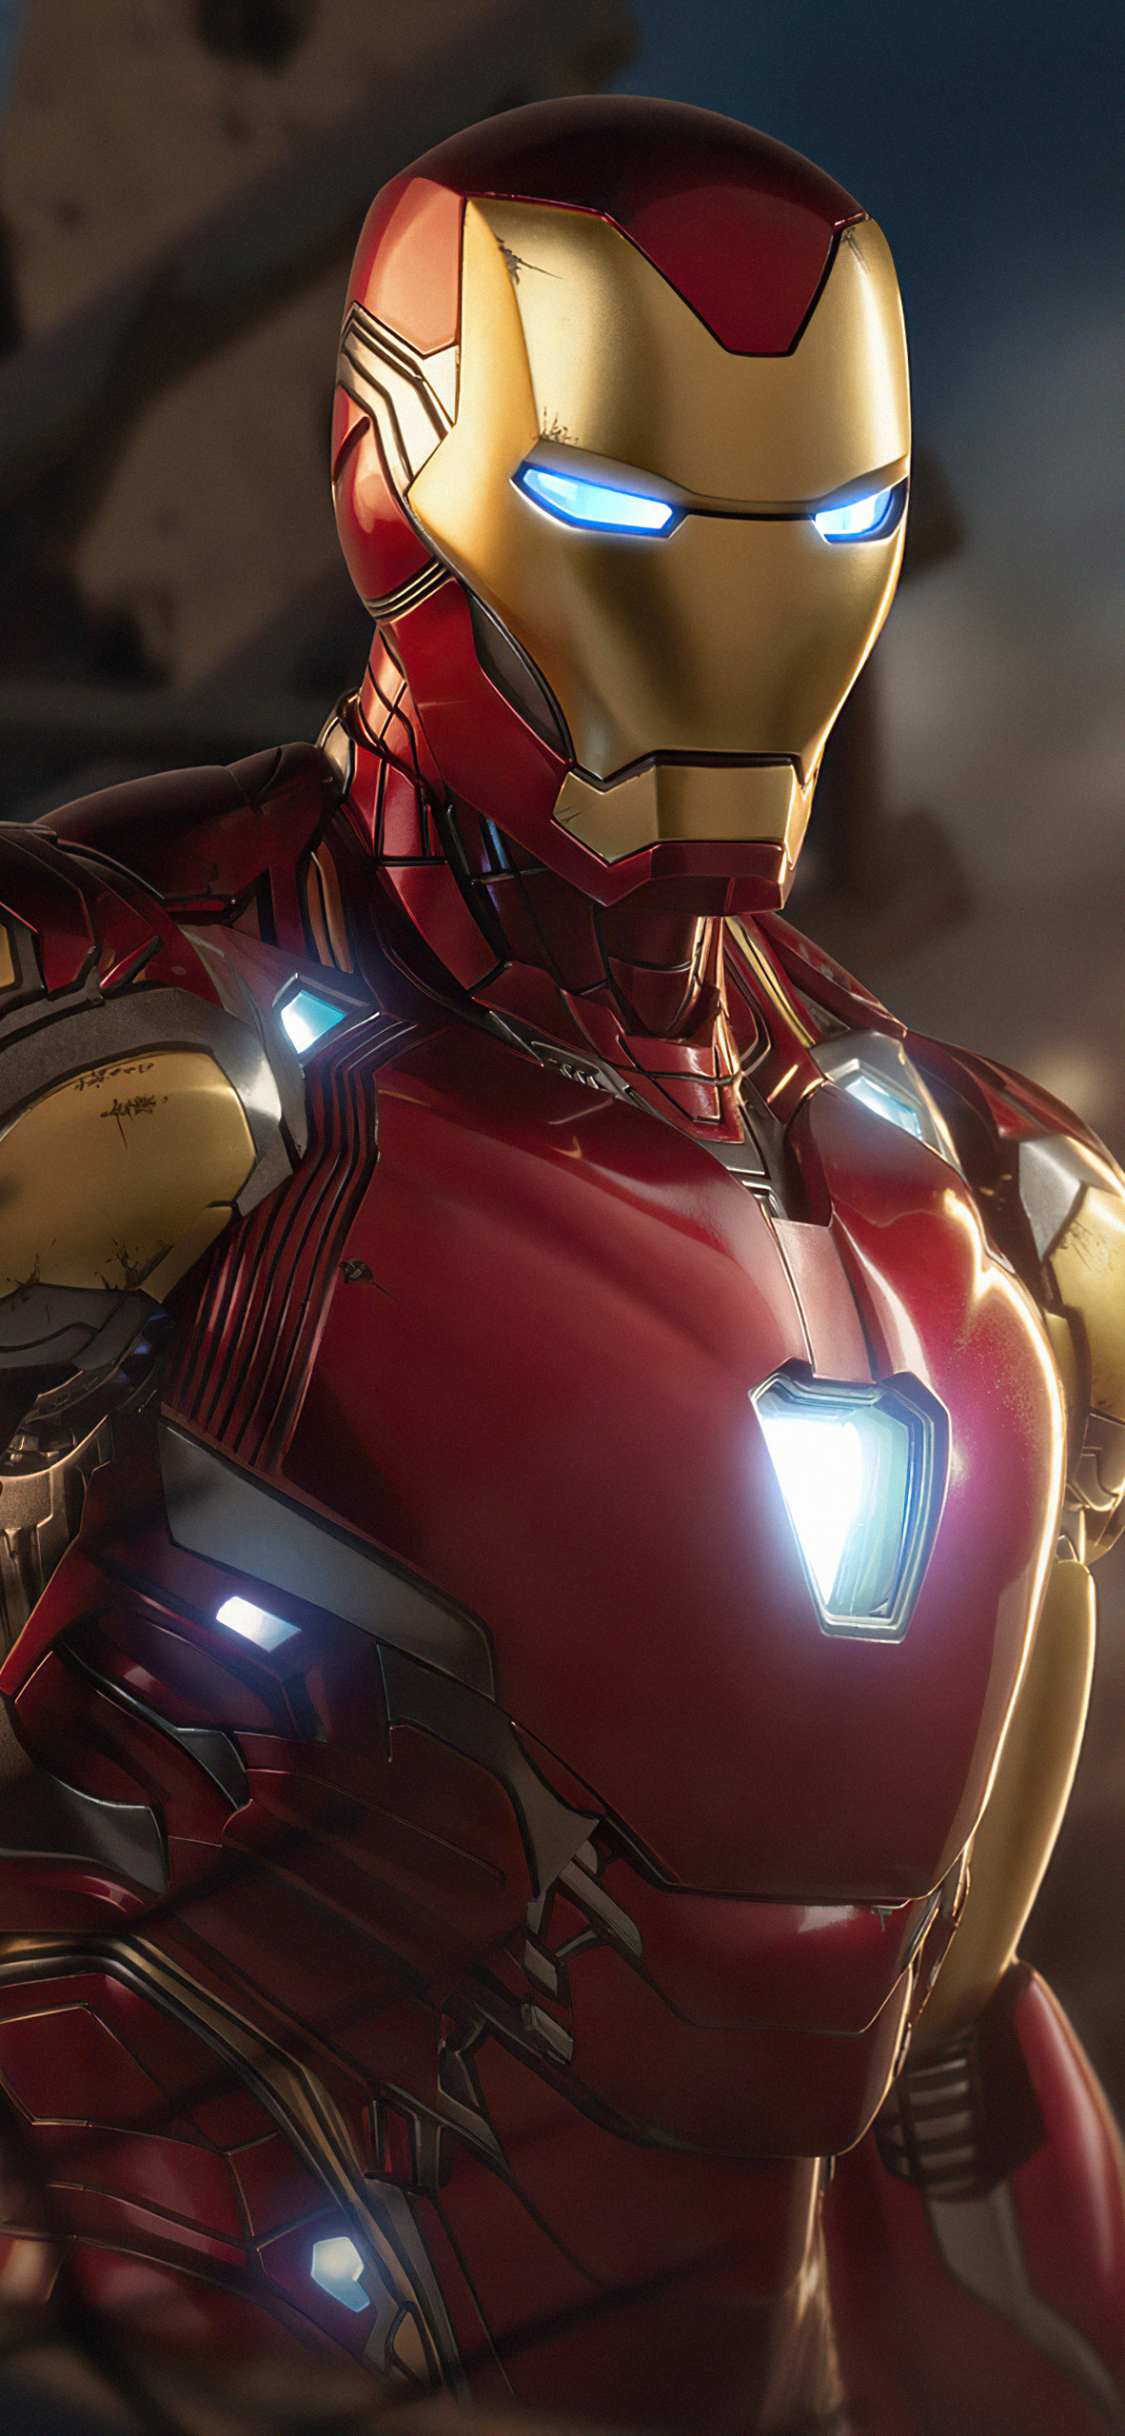 iron man» 1080P, 2k, 4k Full HD Wallpapers, Backgrounds Free Download |  Wallpaper Crafter